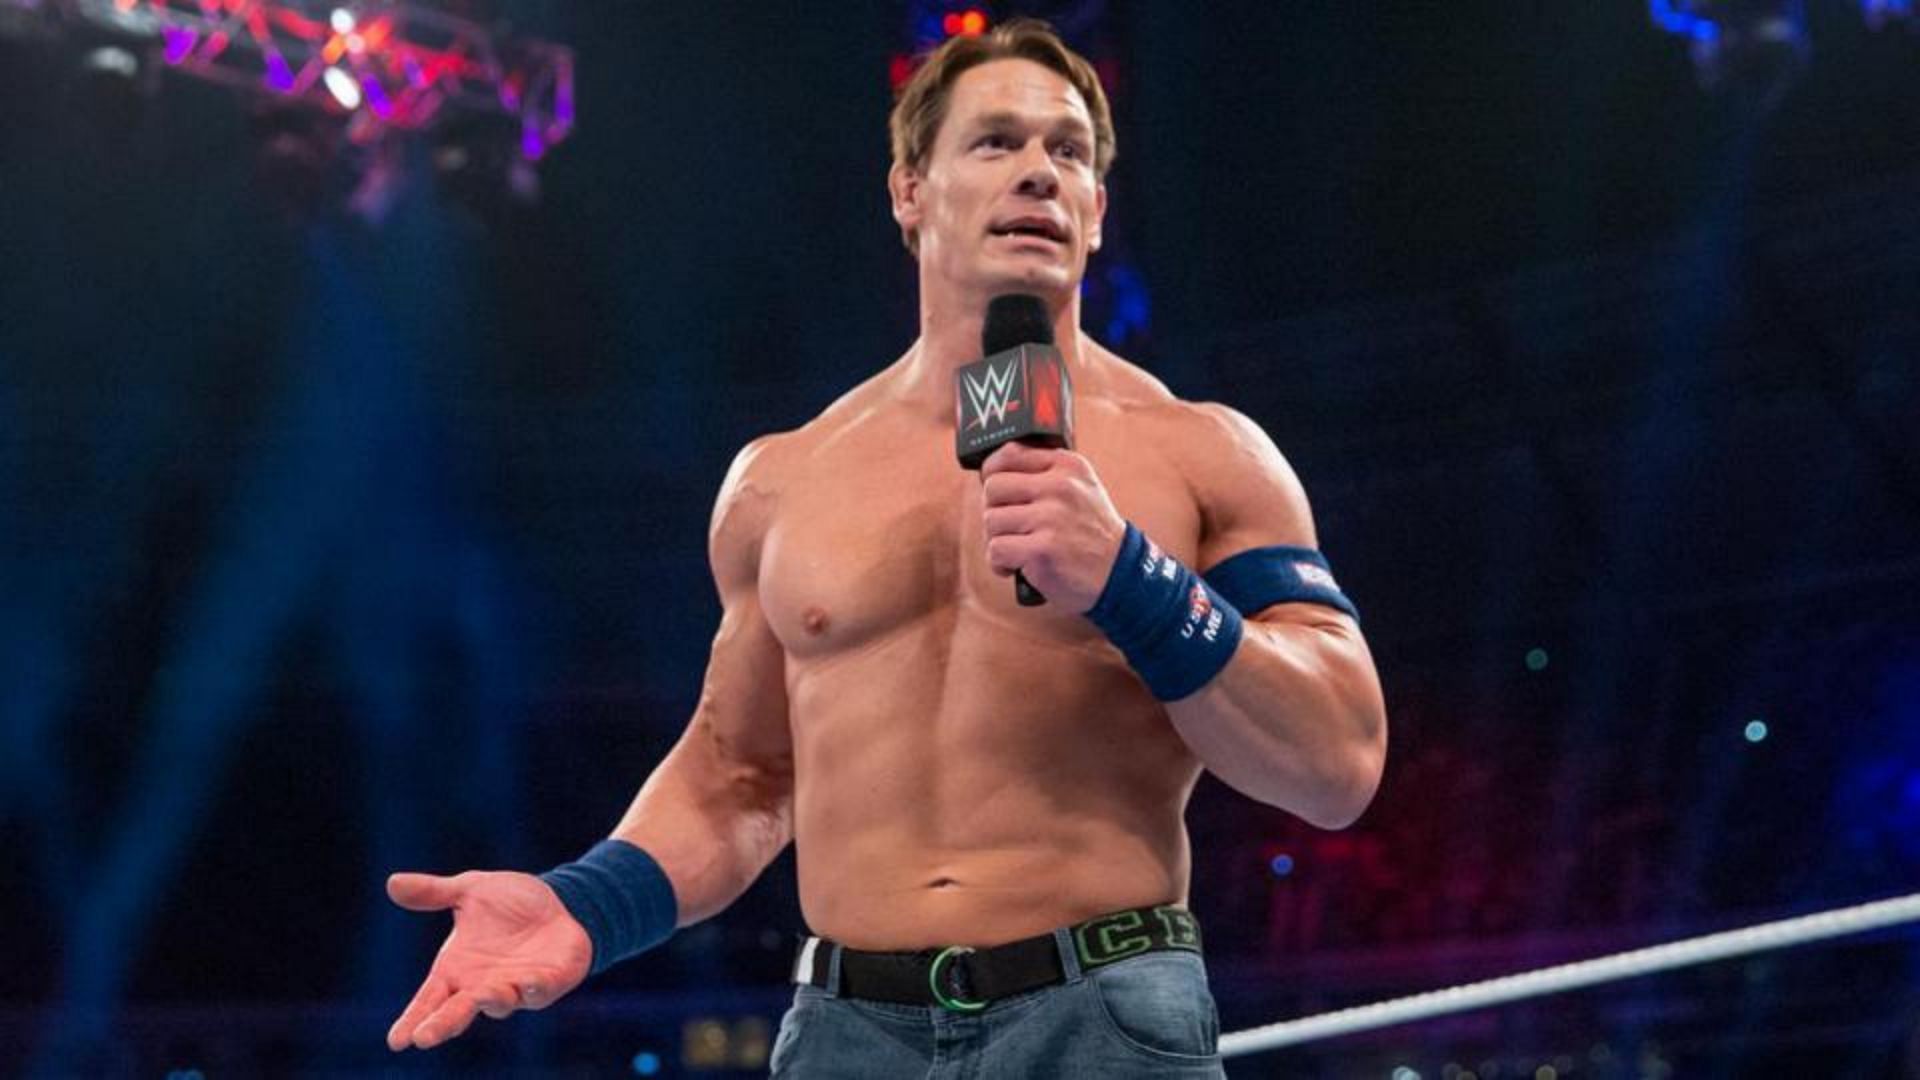 John Cena was known to be a locker room leader.